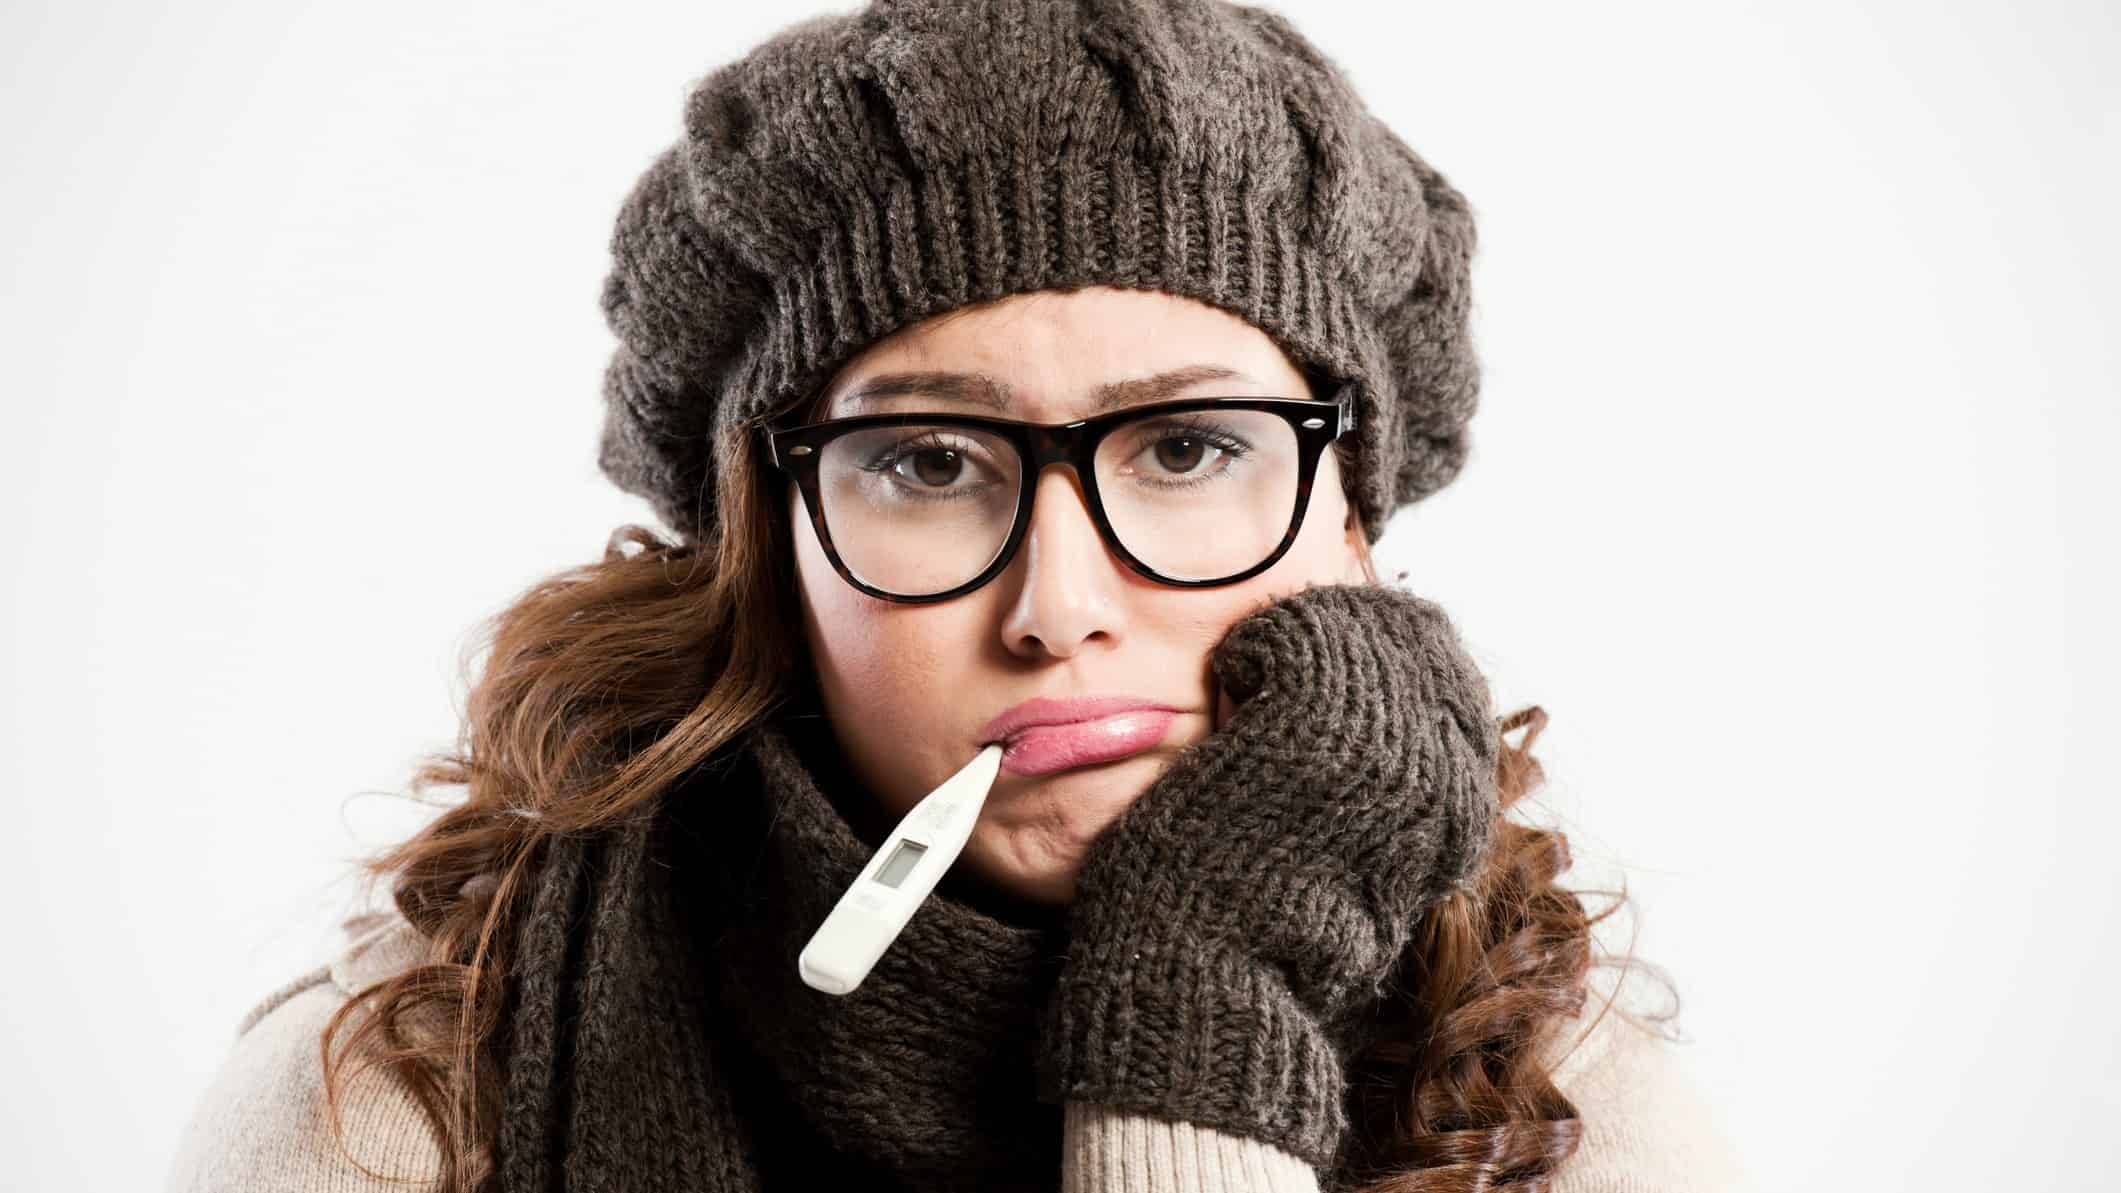 a woman rugged up in a woolen hat and gloves with a thermometer in her mouth props her hand under her chin as she looks dejectedly at the camera,, as though she is miserable from feeling sick.